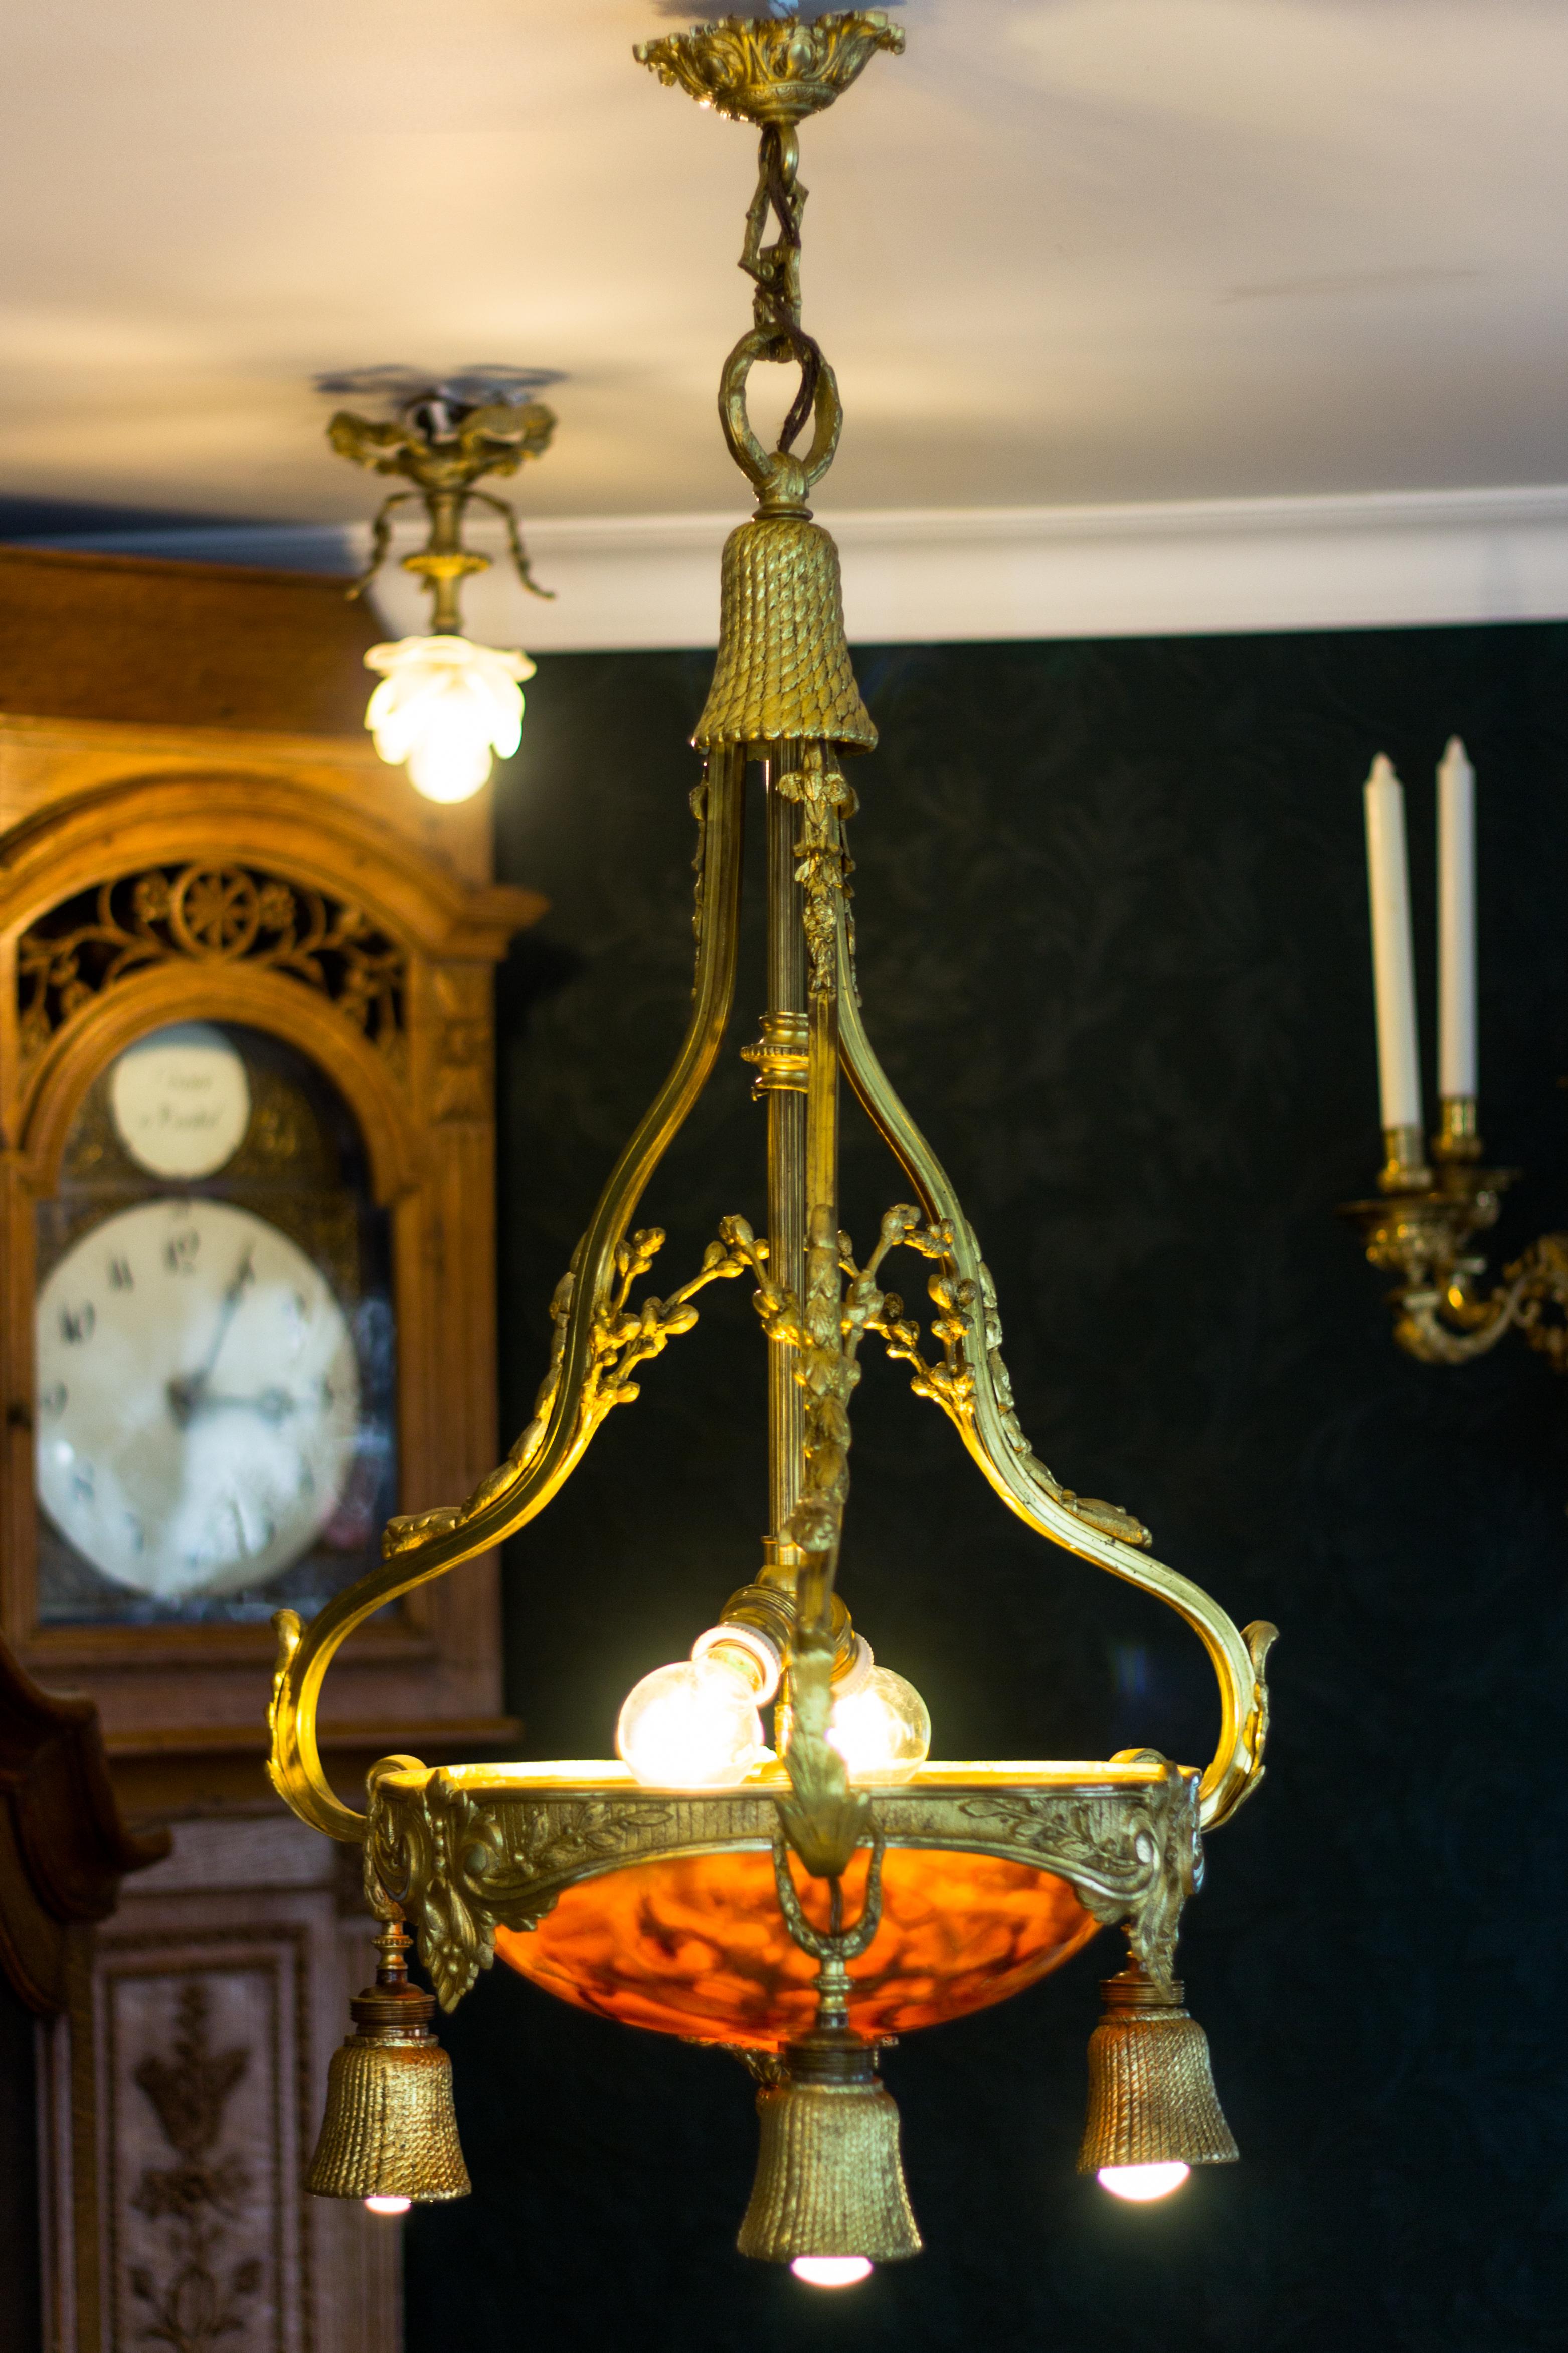 This beautiful gilt bronze and alabaster chandelier has six light points - original E27 sockets with new wiring. 
Free delivery in Germany.
Measures: Total height is 38 inches / 96 cm; diameter 18.5 inches / 47 cm.